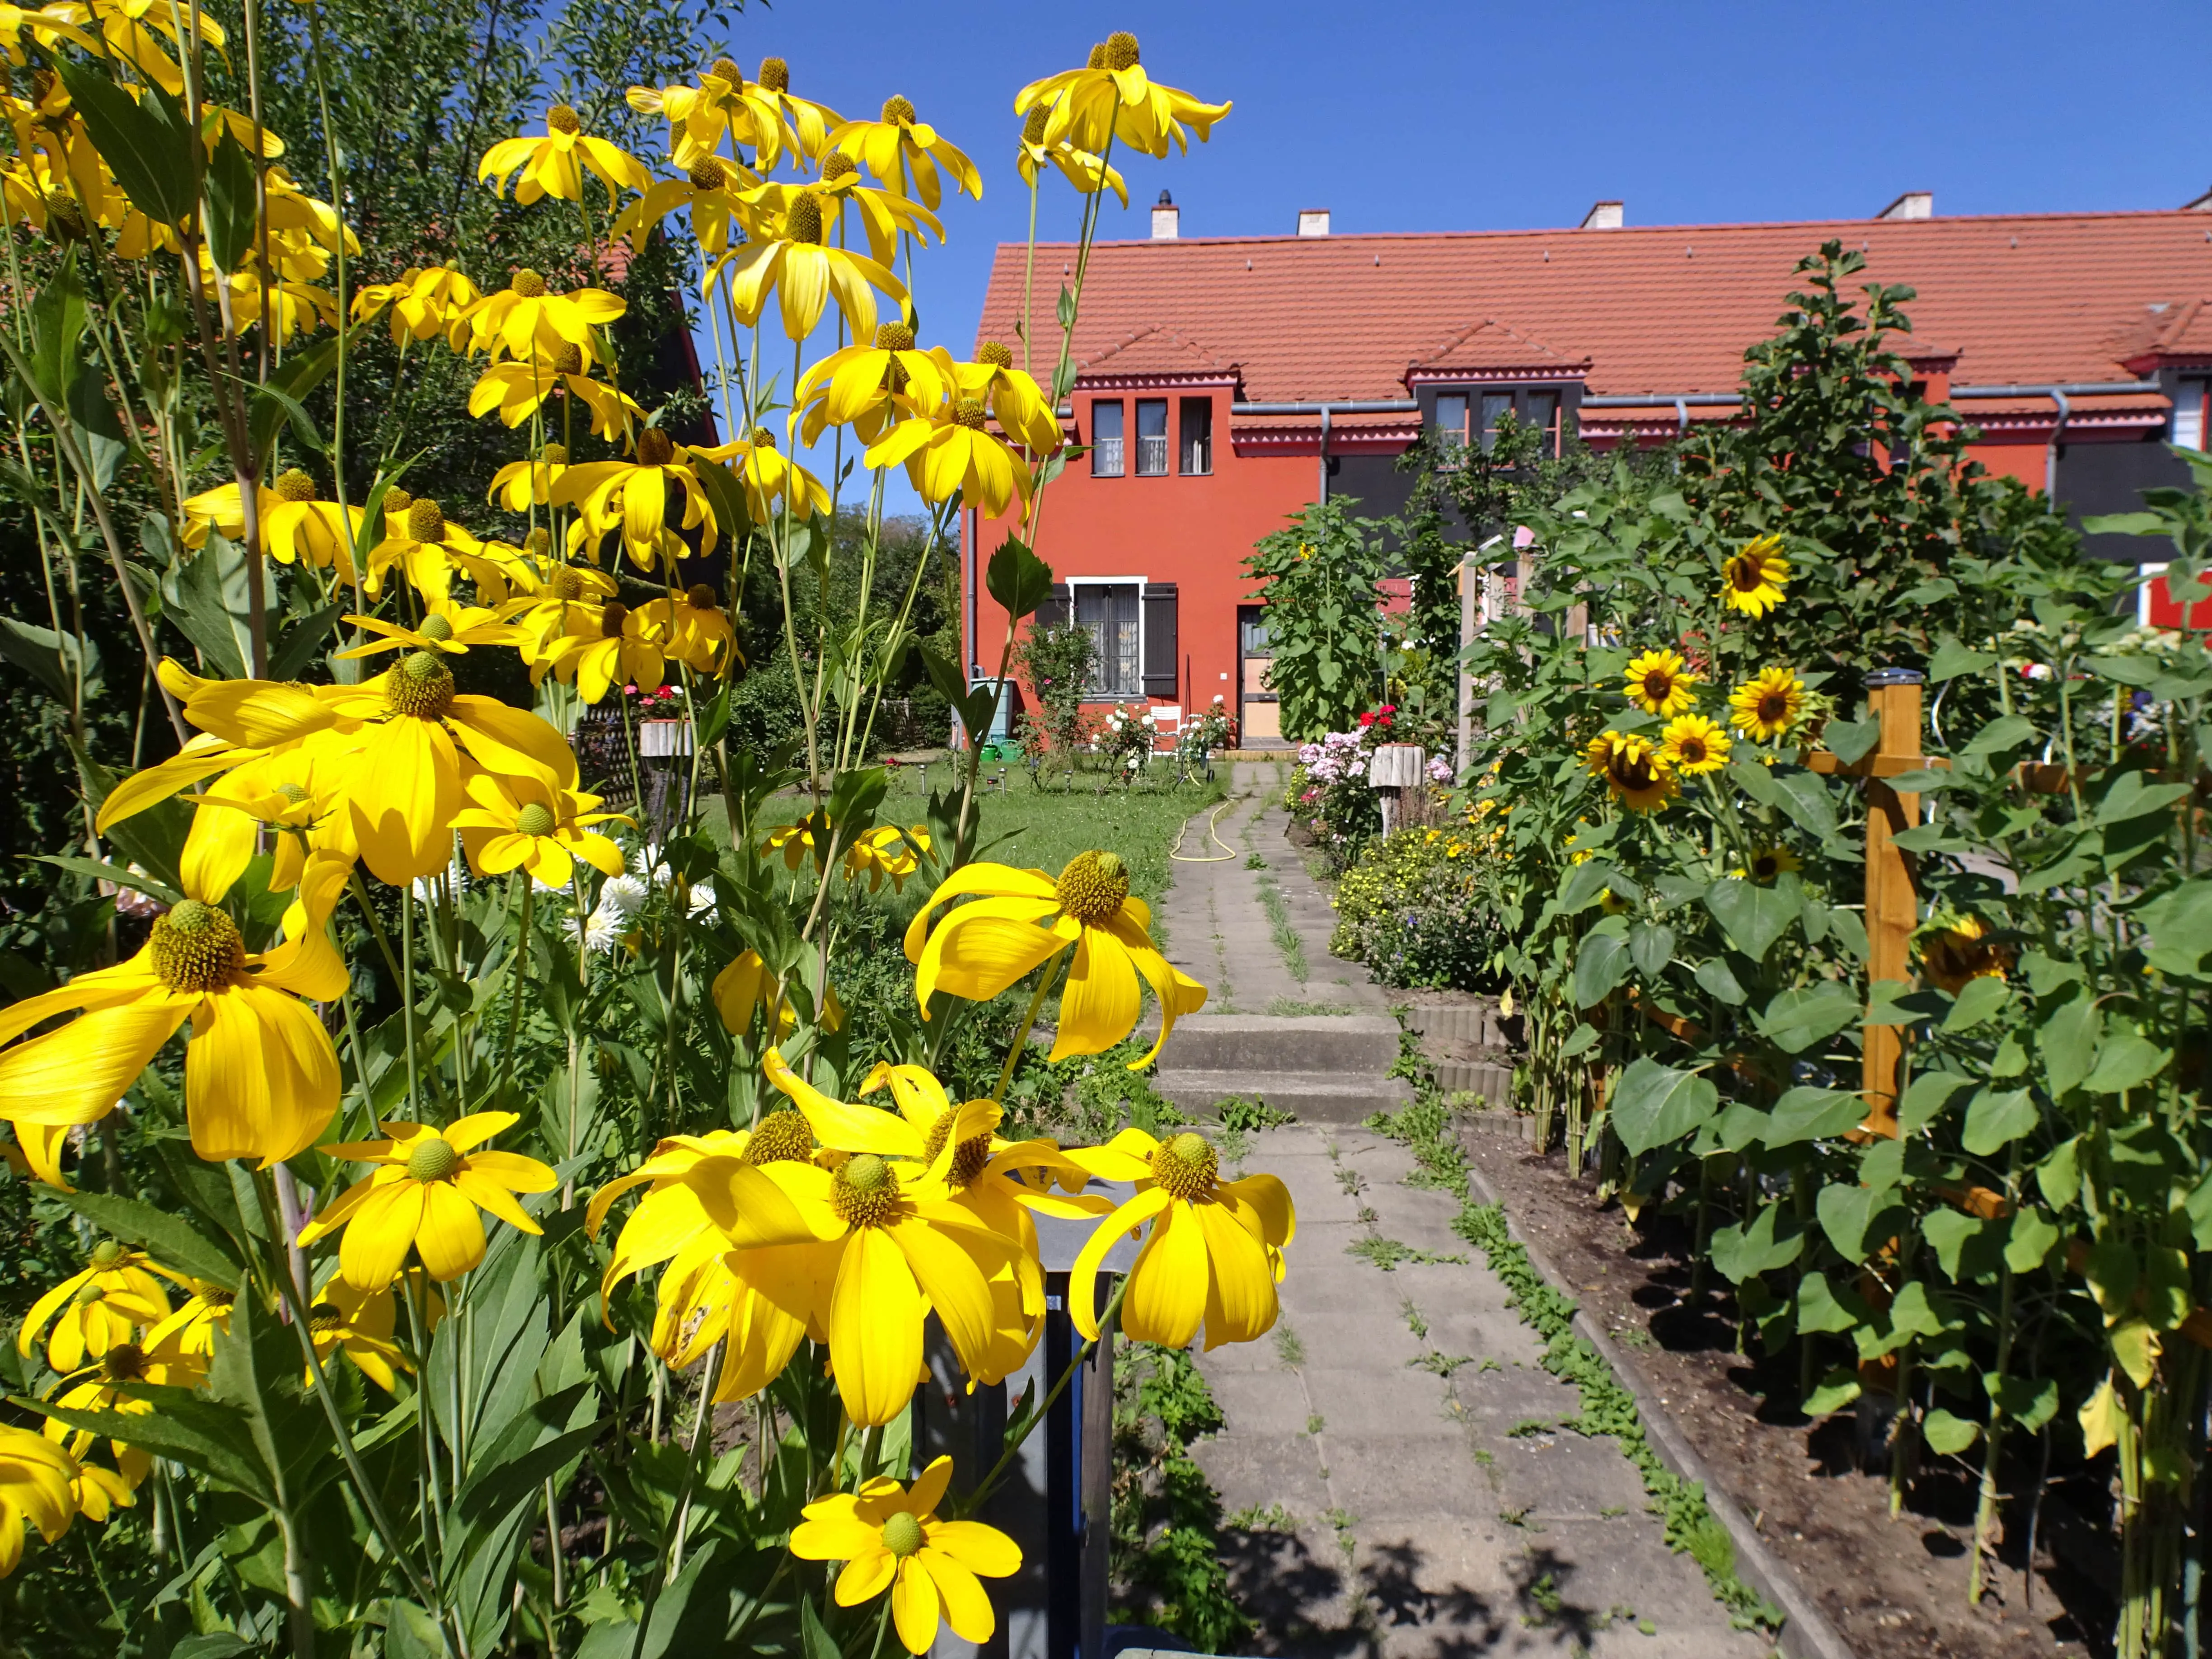 Yellow flowers in a garden in front of a terrace house